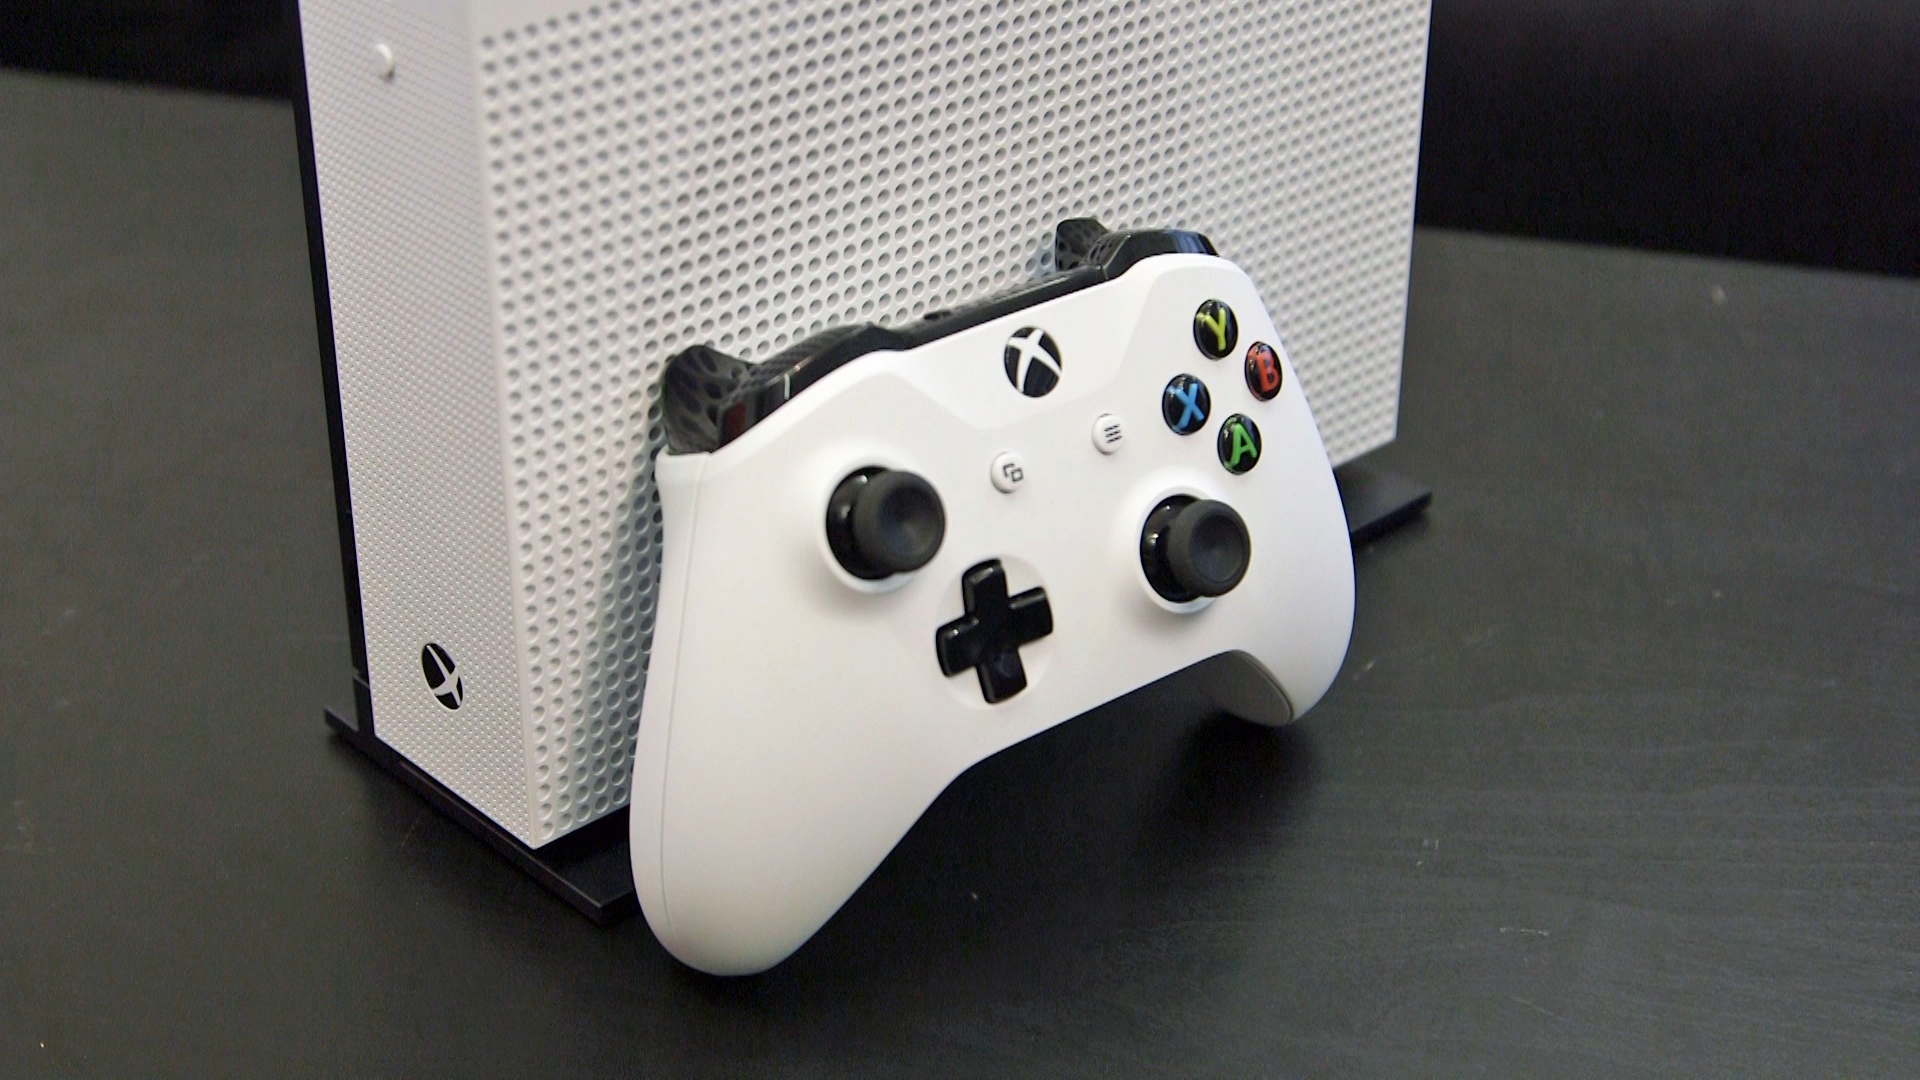 xbox one s for sale second hand